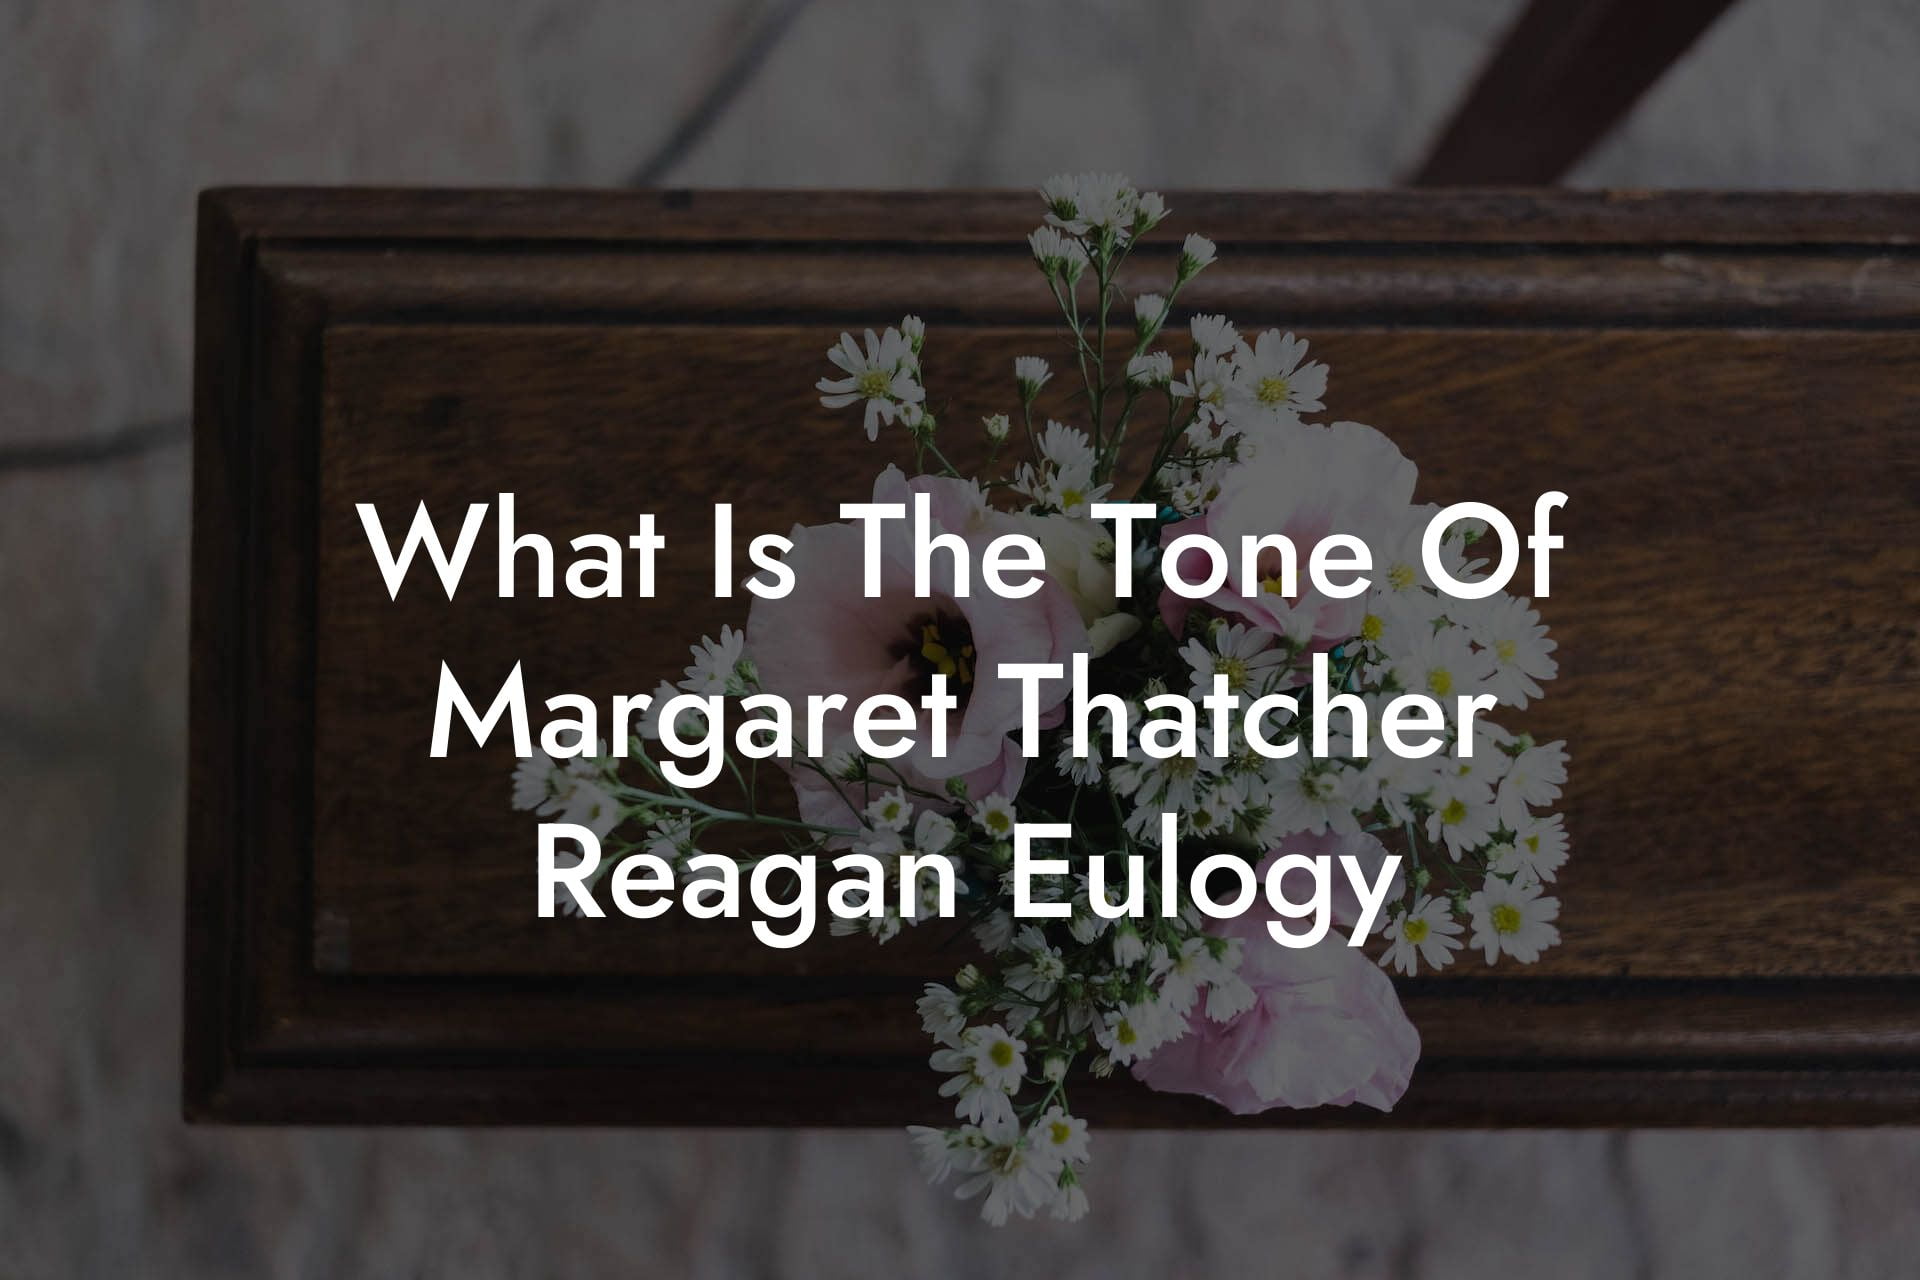 What Is The Tone Of Margaret Thatcher Reagan Eulogy